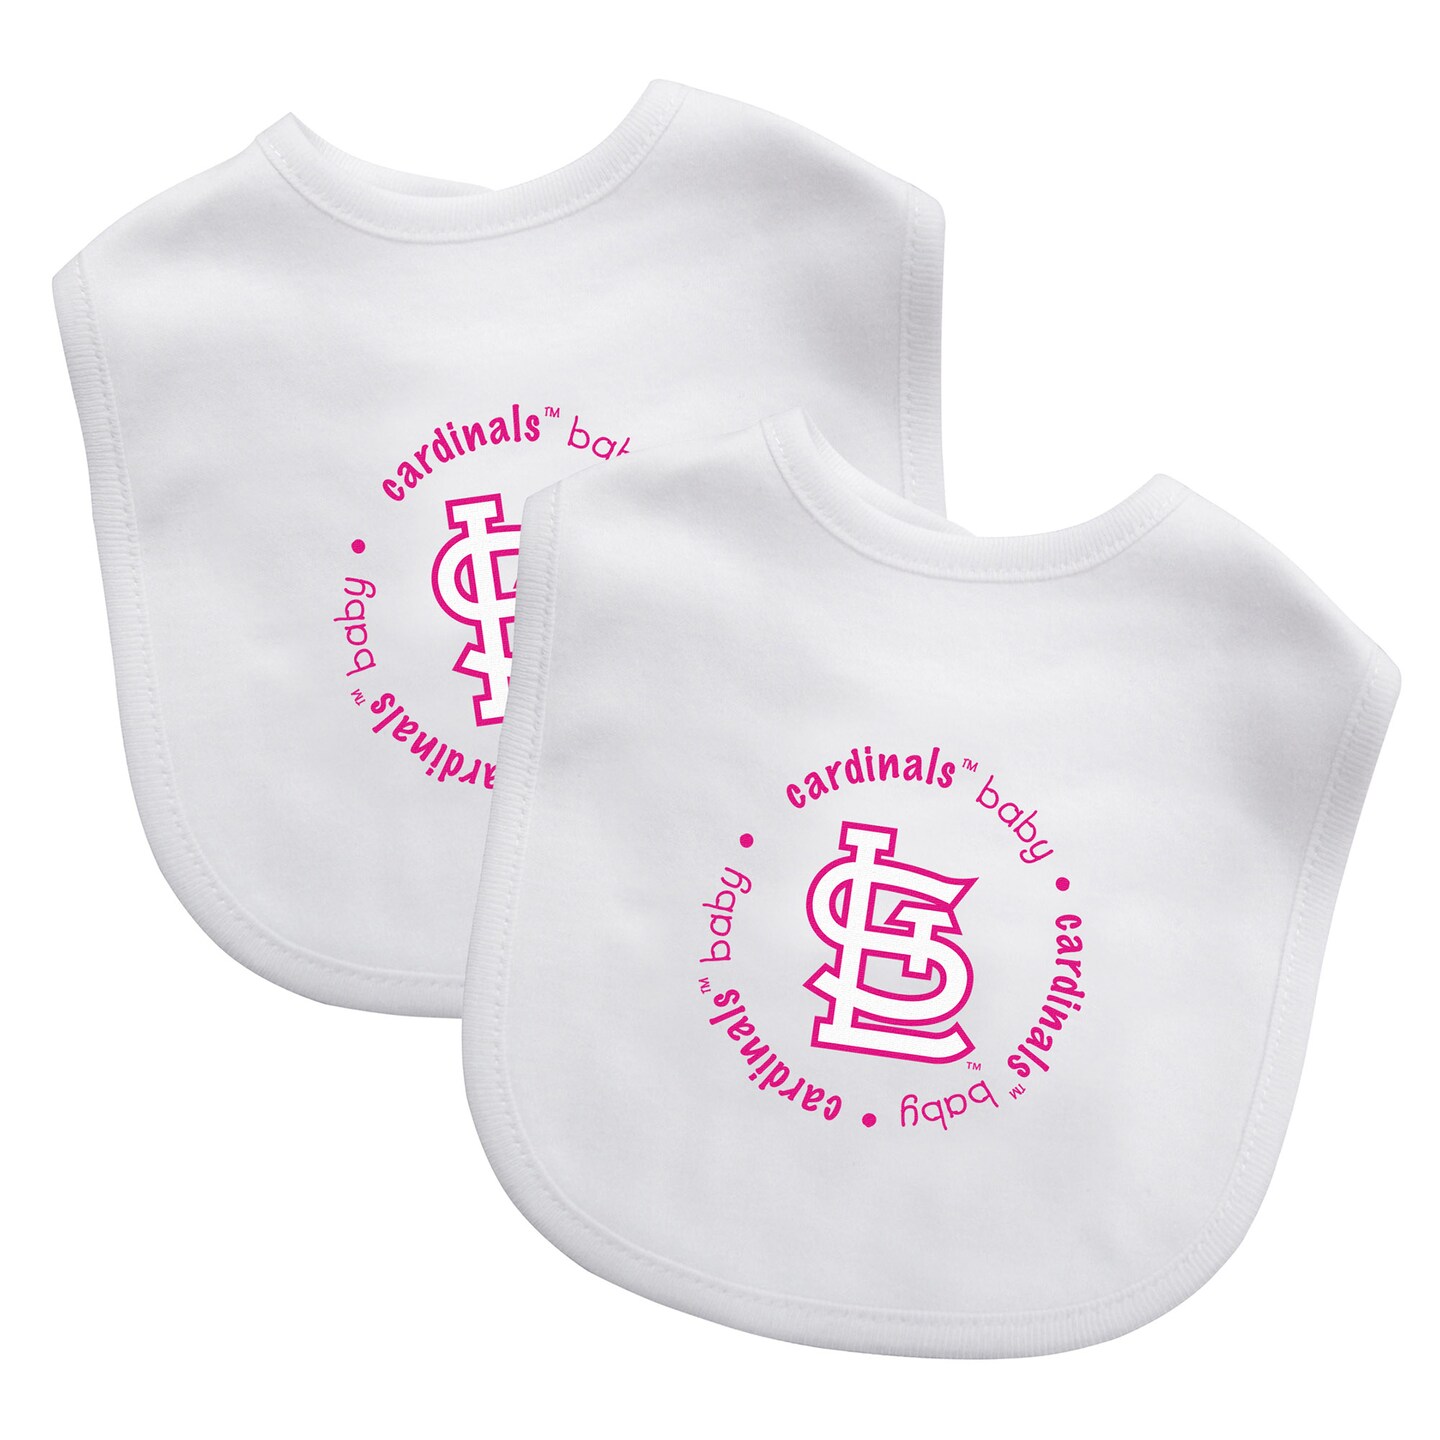 Baby Fanatic Officially Licensed Pink Unisex Cotton Baby Bibs 2 Pack - MLB  St. Louis Cardinals Baby Apparel Set